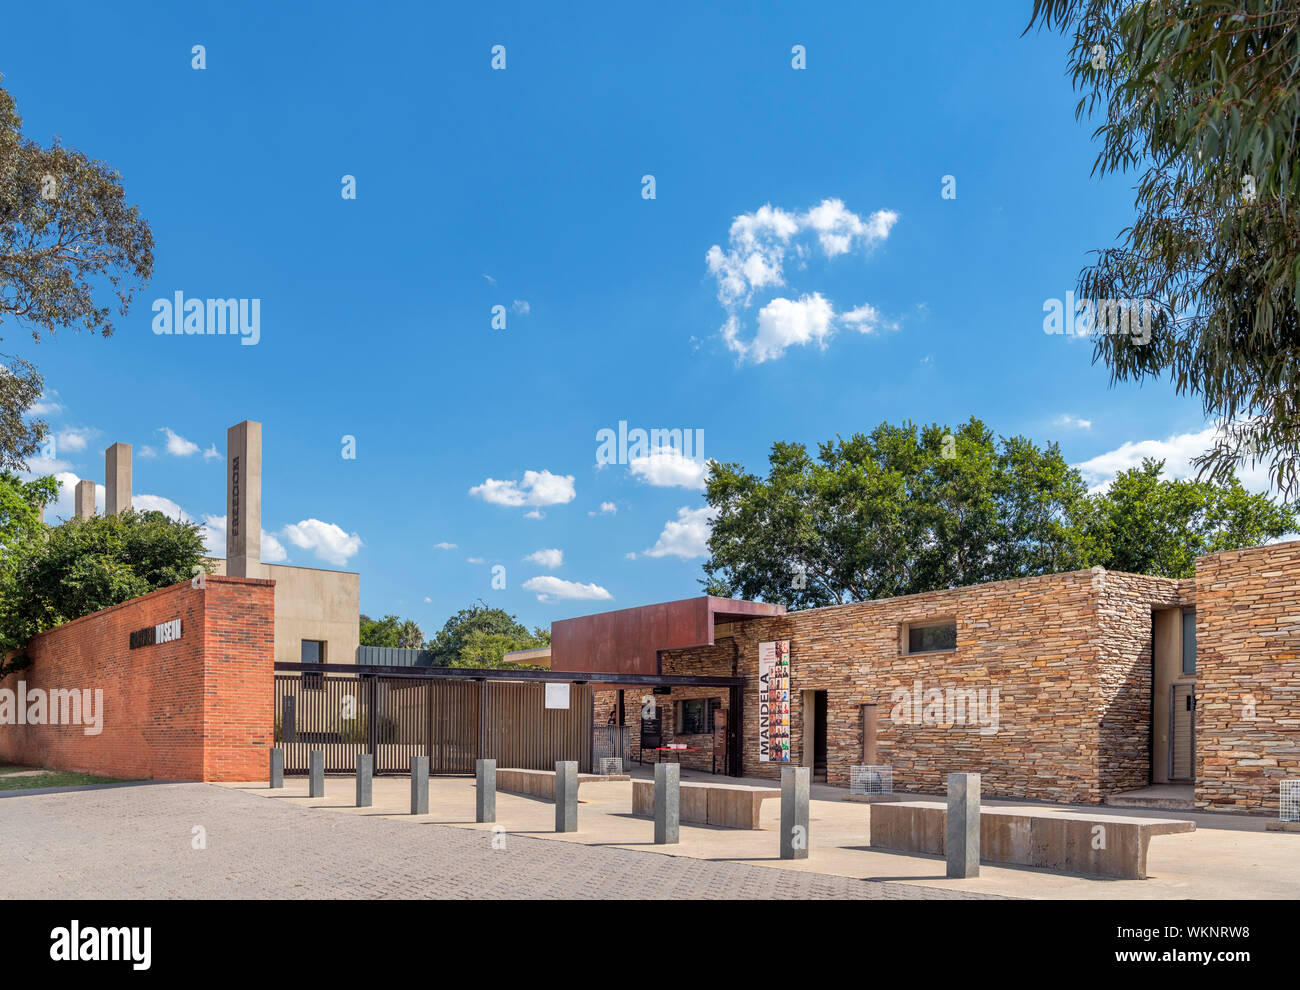 Entrance to the Apartheid Museum, Gold Reef City, Johannesburg, South Africa Stock Photo